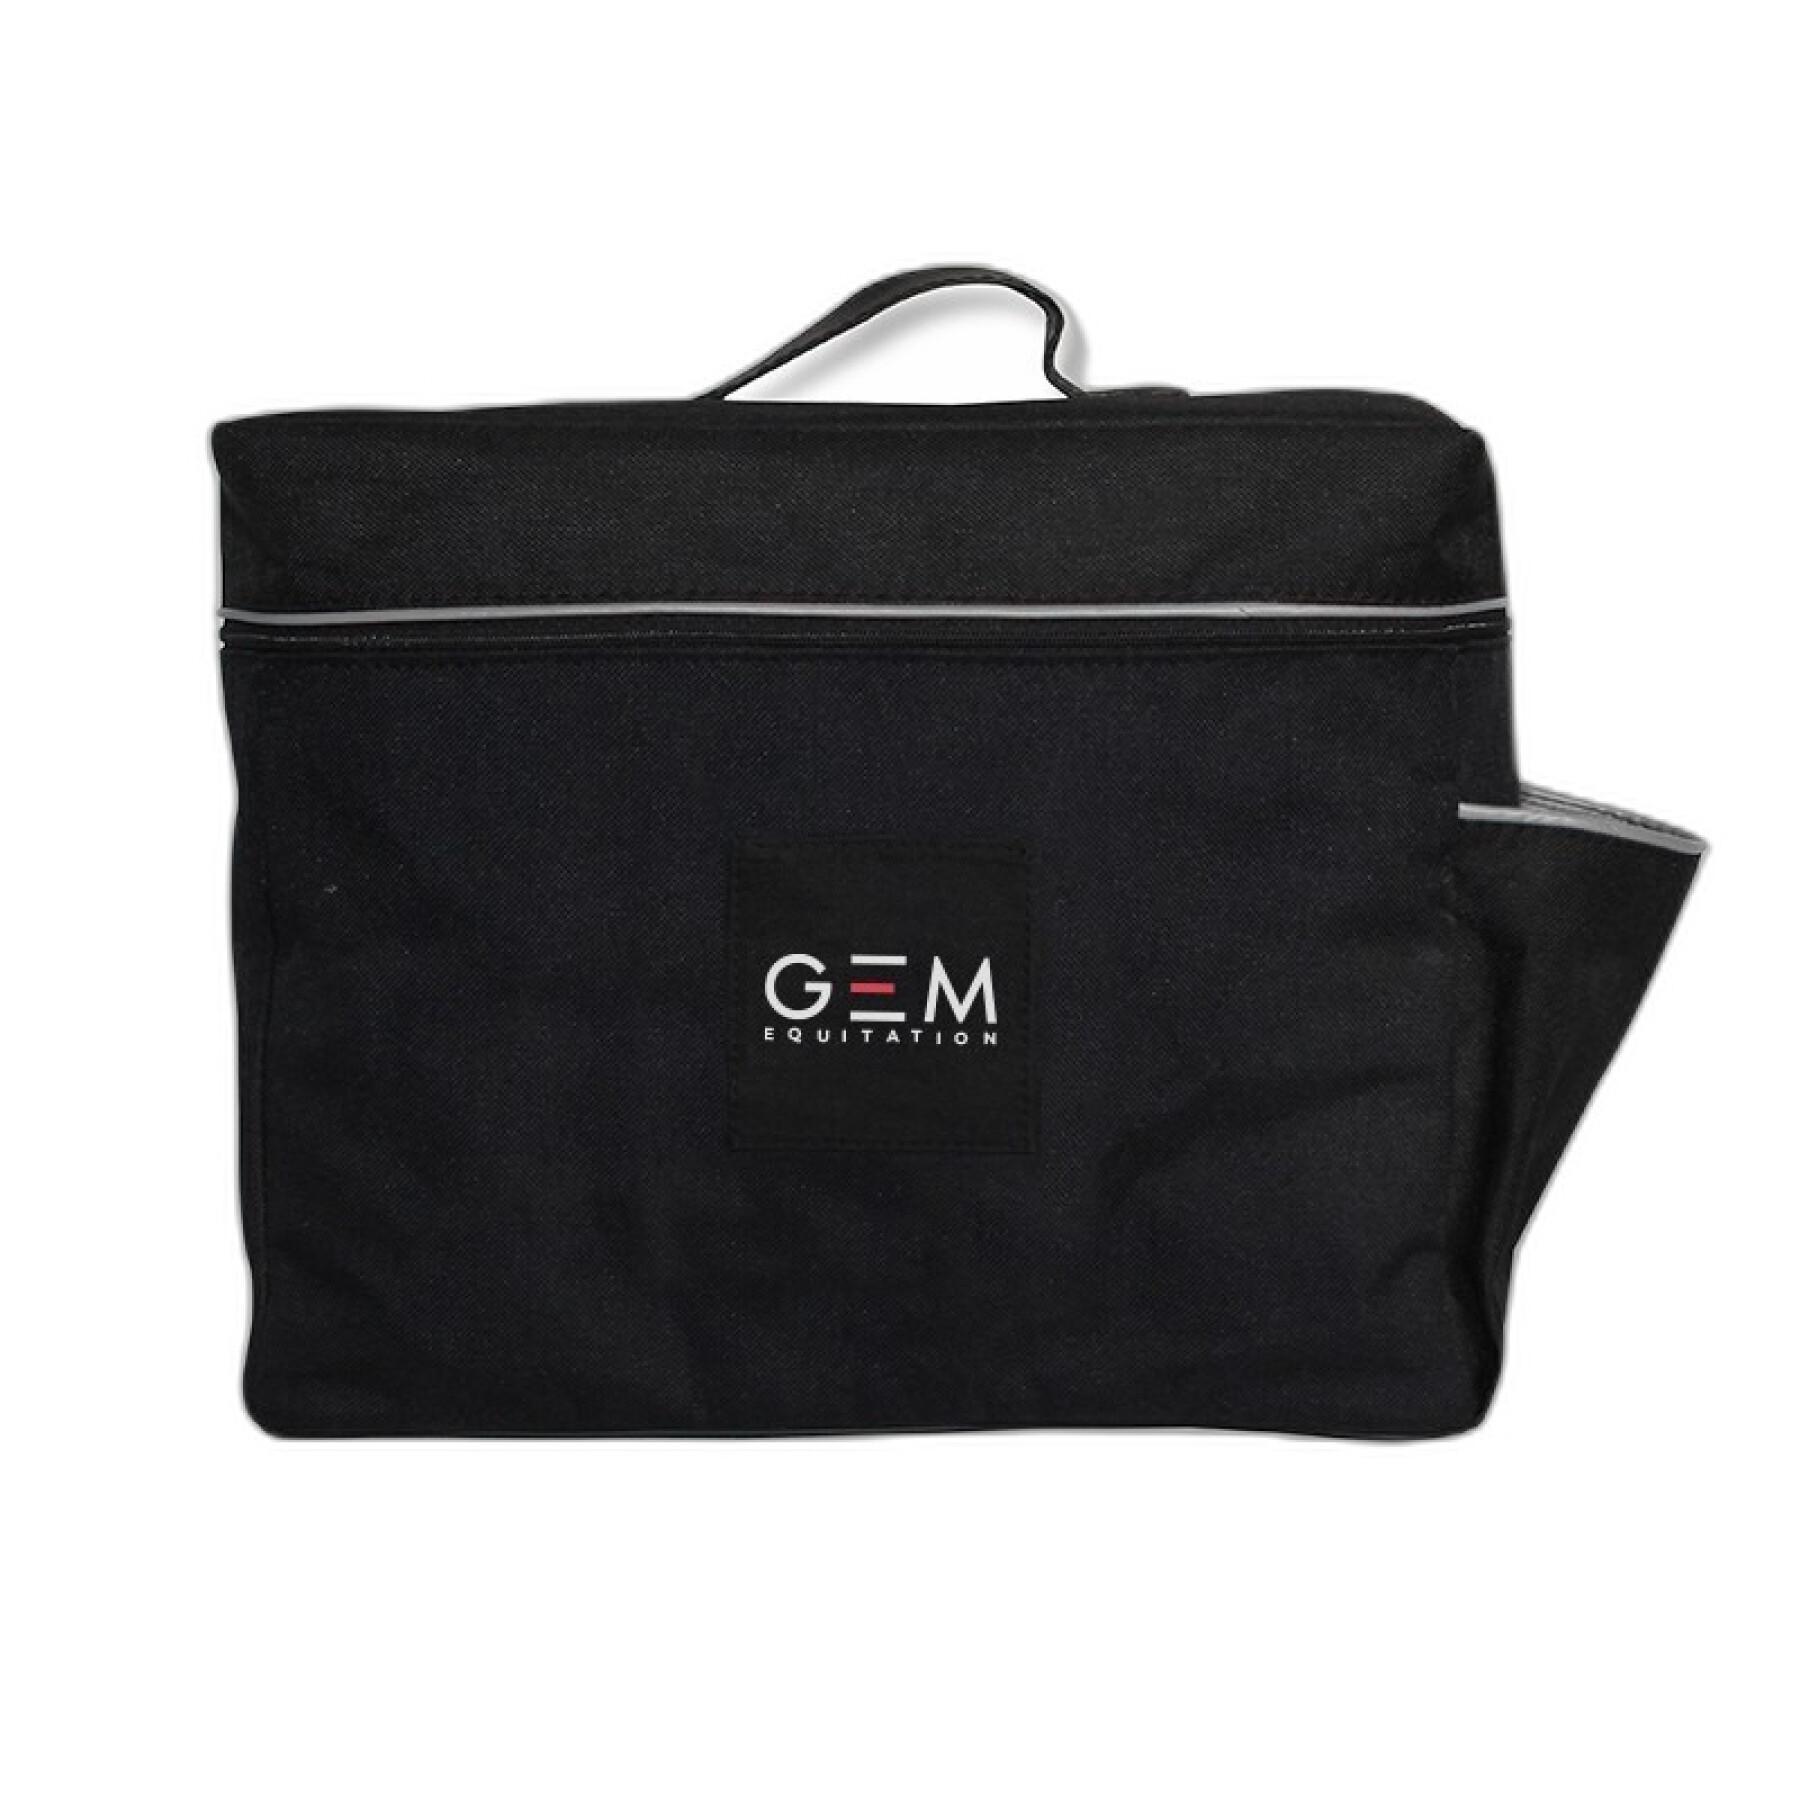 Grooming bag for horse or pony GEM